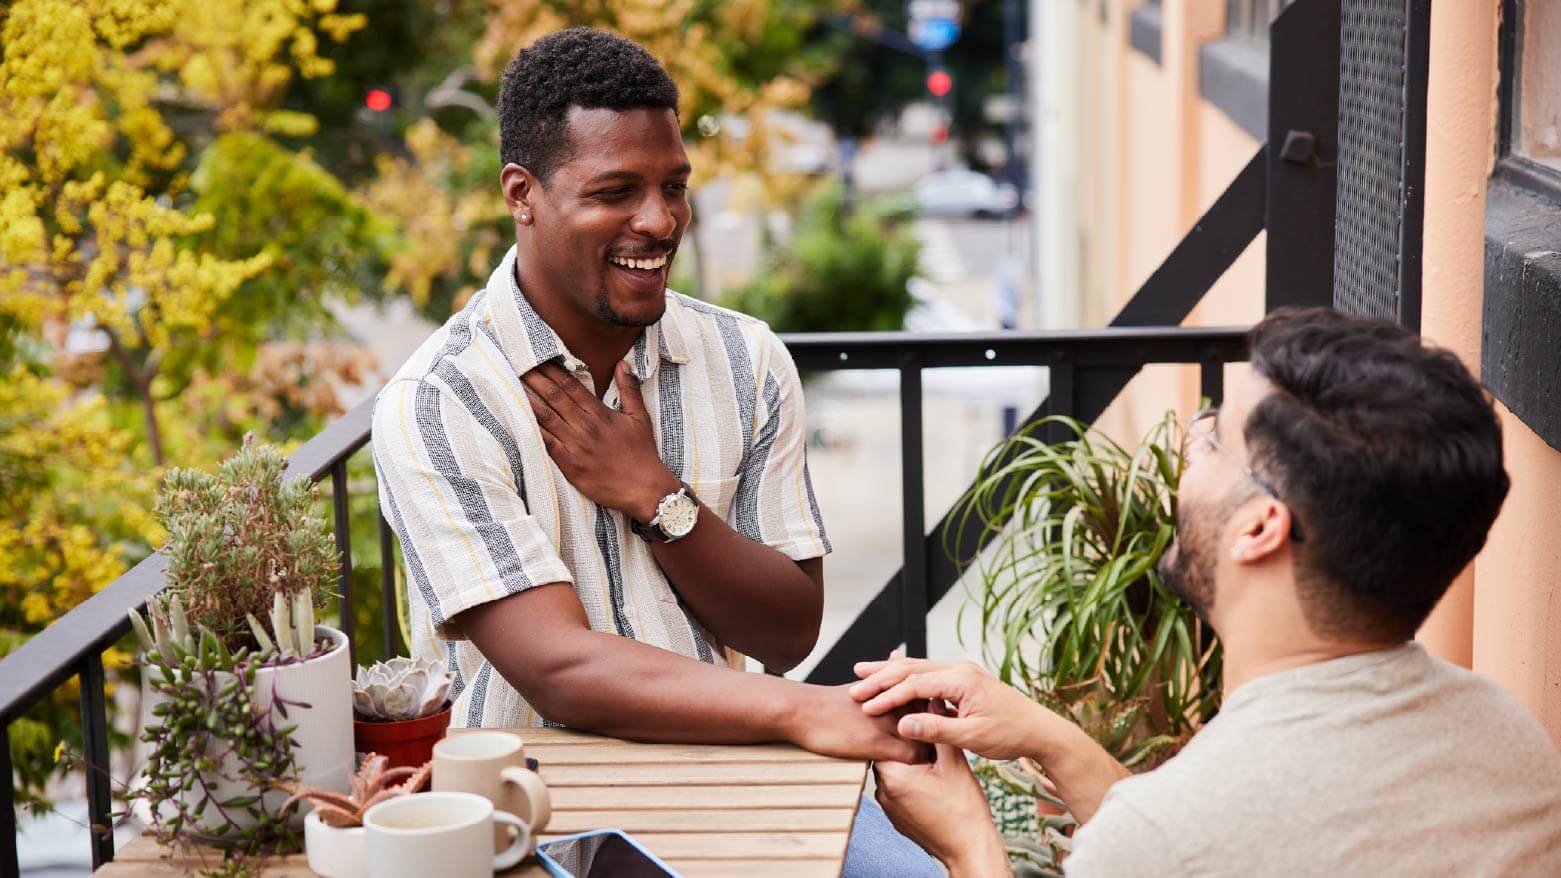 Man sitting at outdoor patio table surprised by his partner kneeling down and proposing while holding his hand